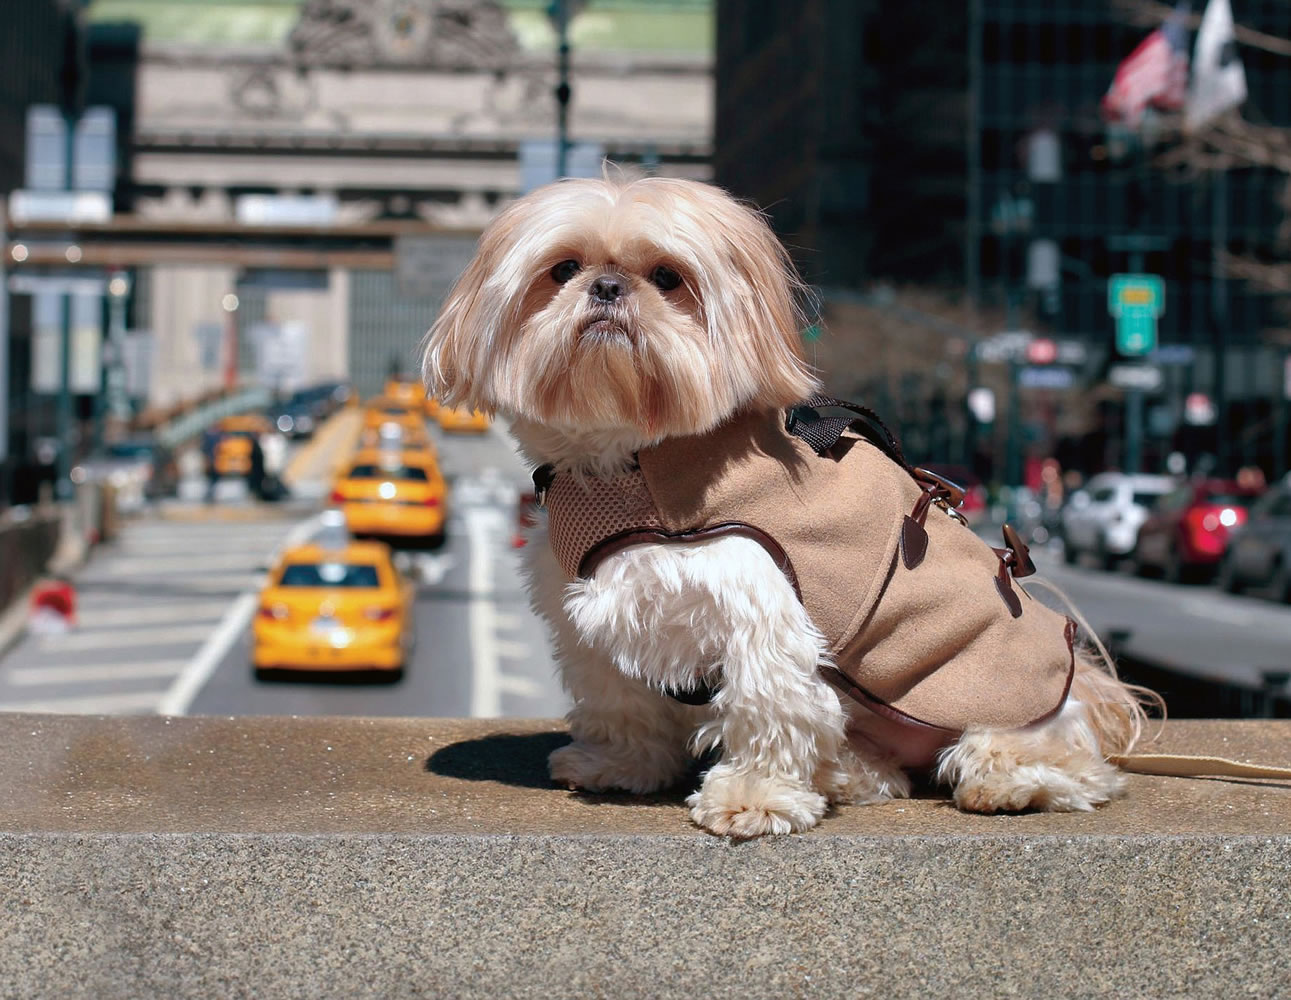 Chewie, a 3-year-old shih tzu, wears a Central Park Pups' Park Ave Peacoat in New York. For some pet owners, clothing plays into a luxury lifestyle. For others, it's a way to match man's best friend.